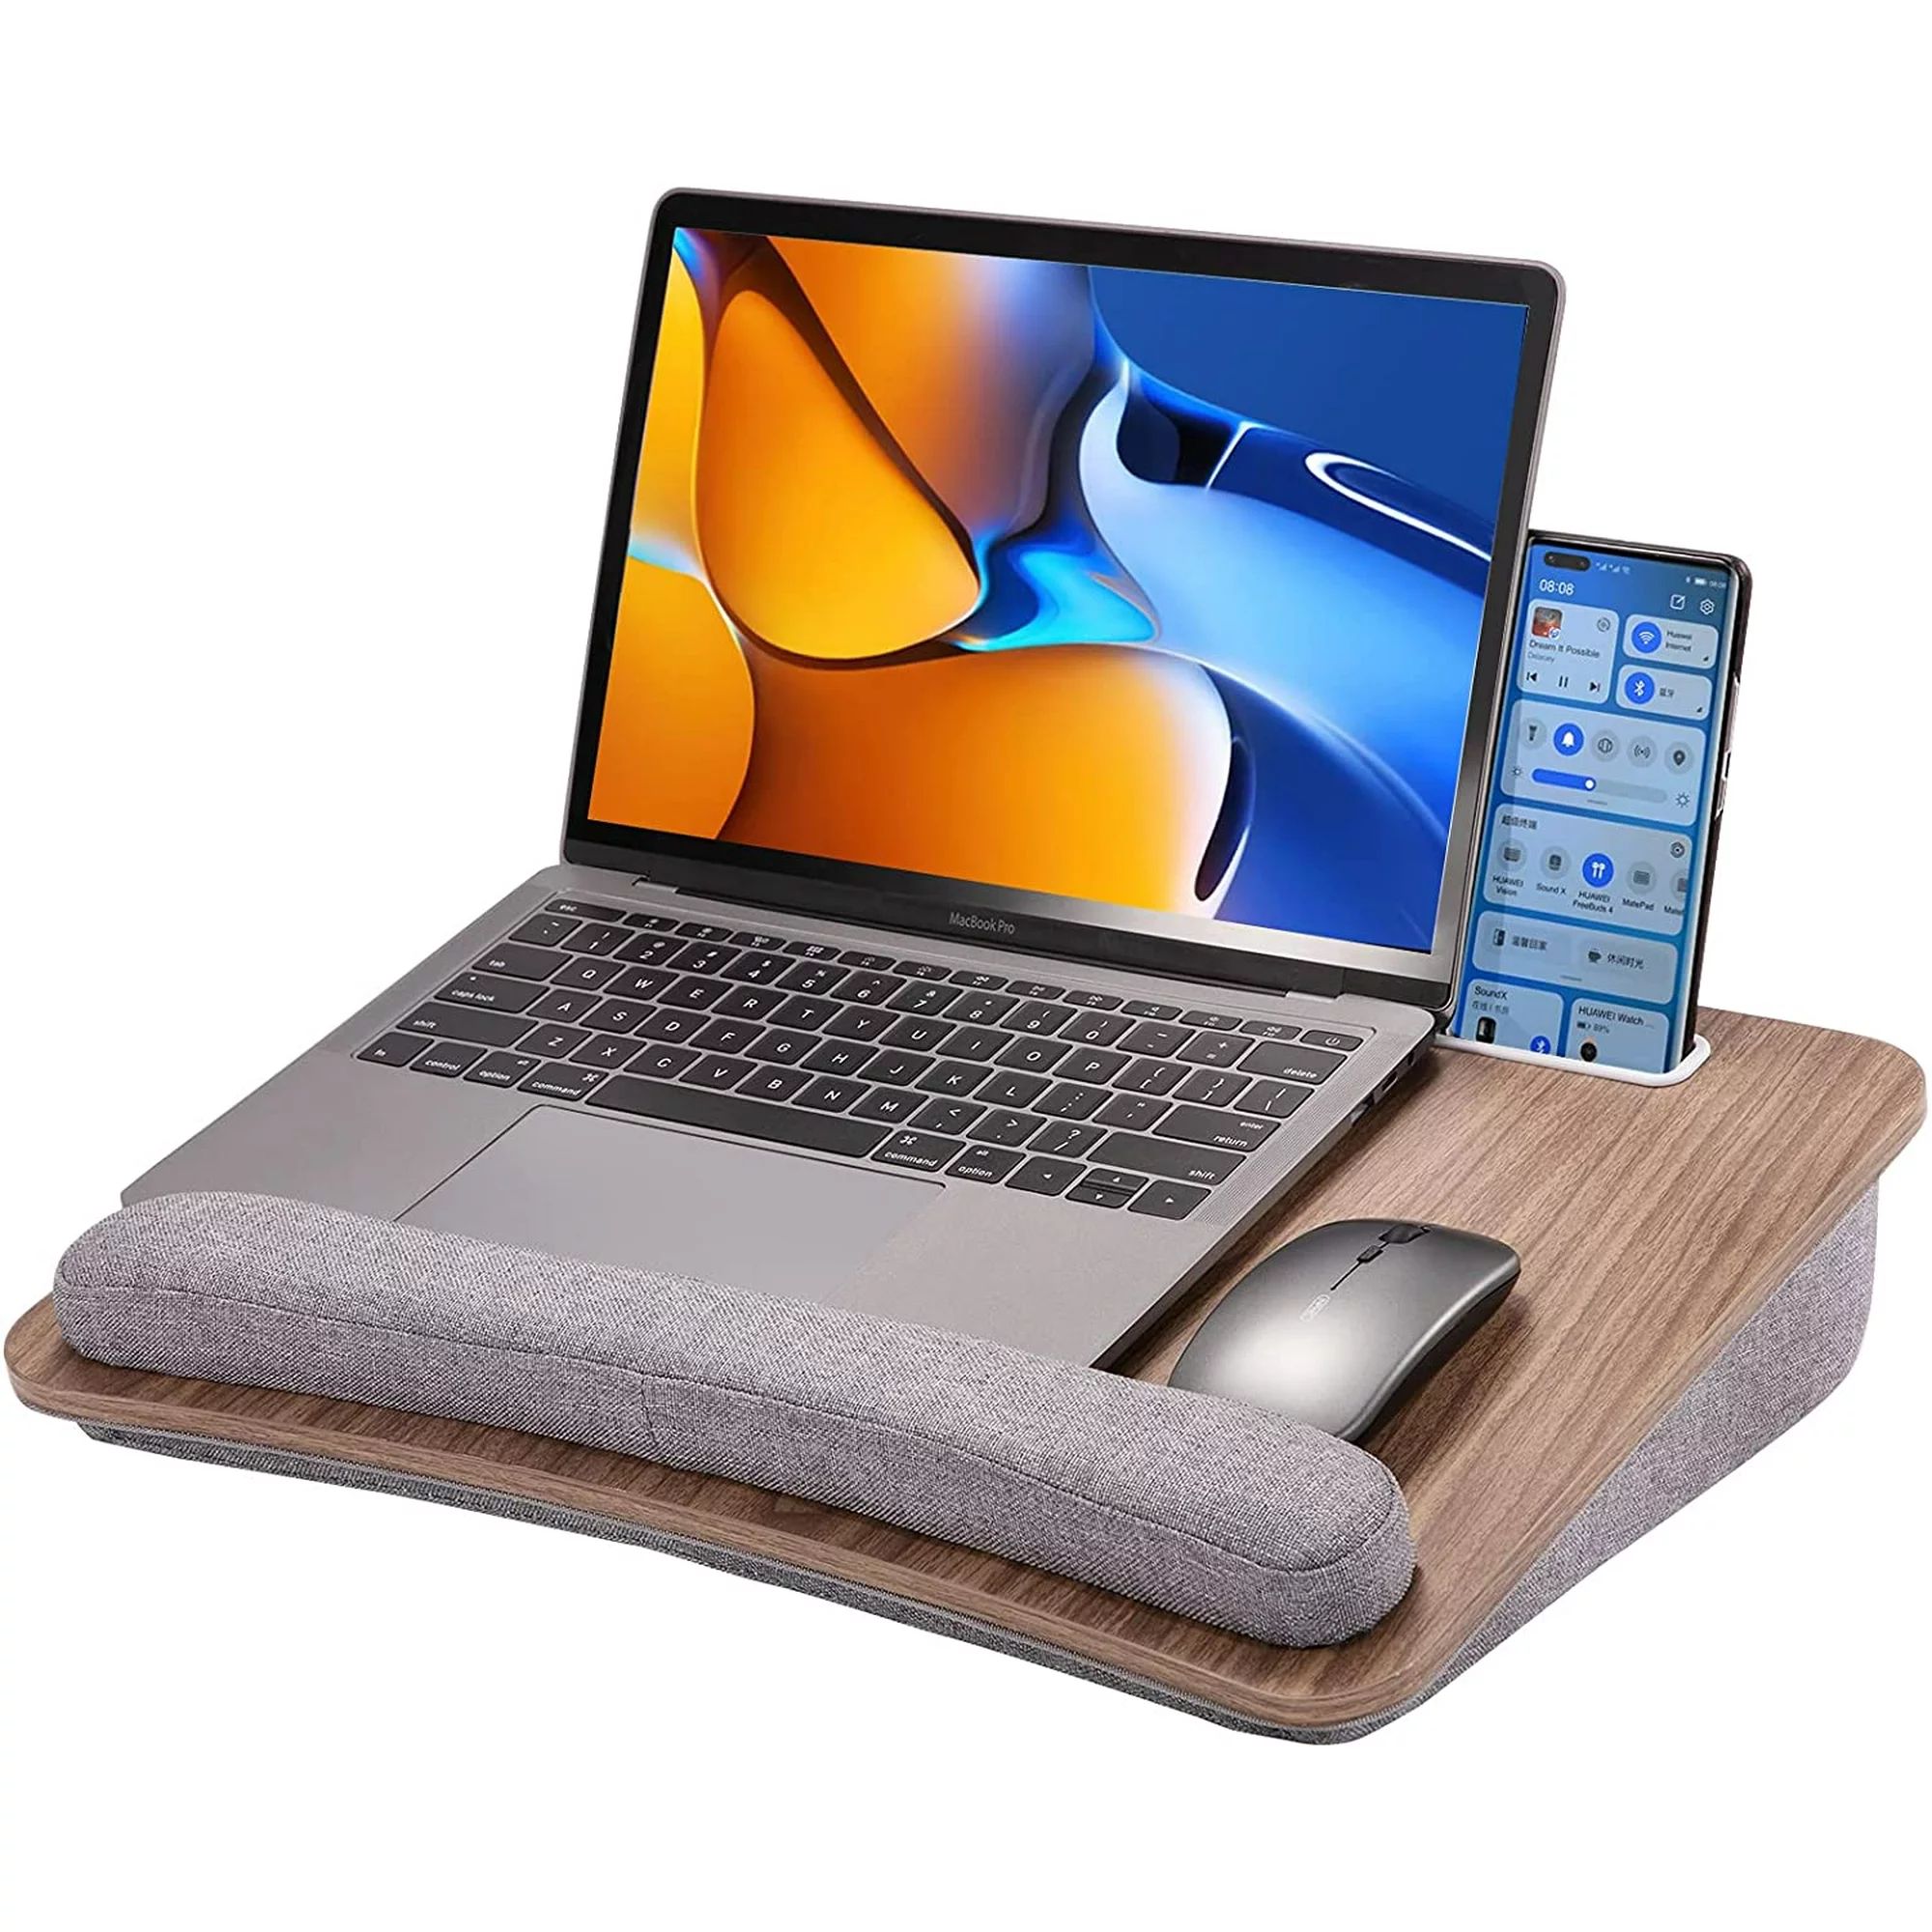 Portable Home Office Lap Desk with Pillow Cushion Fits Up To 15.6 Inch Laptops | Walmart (US)